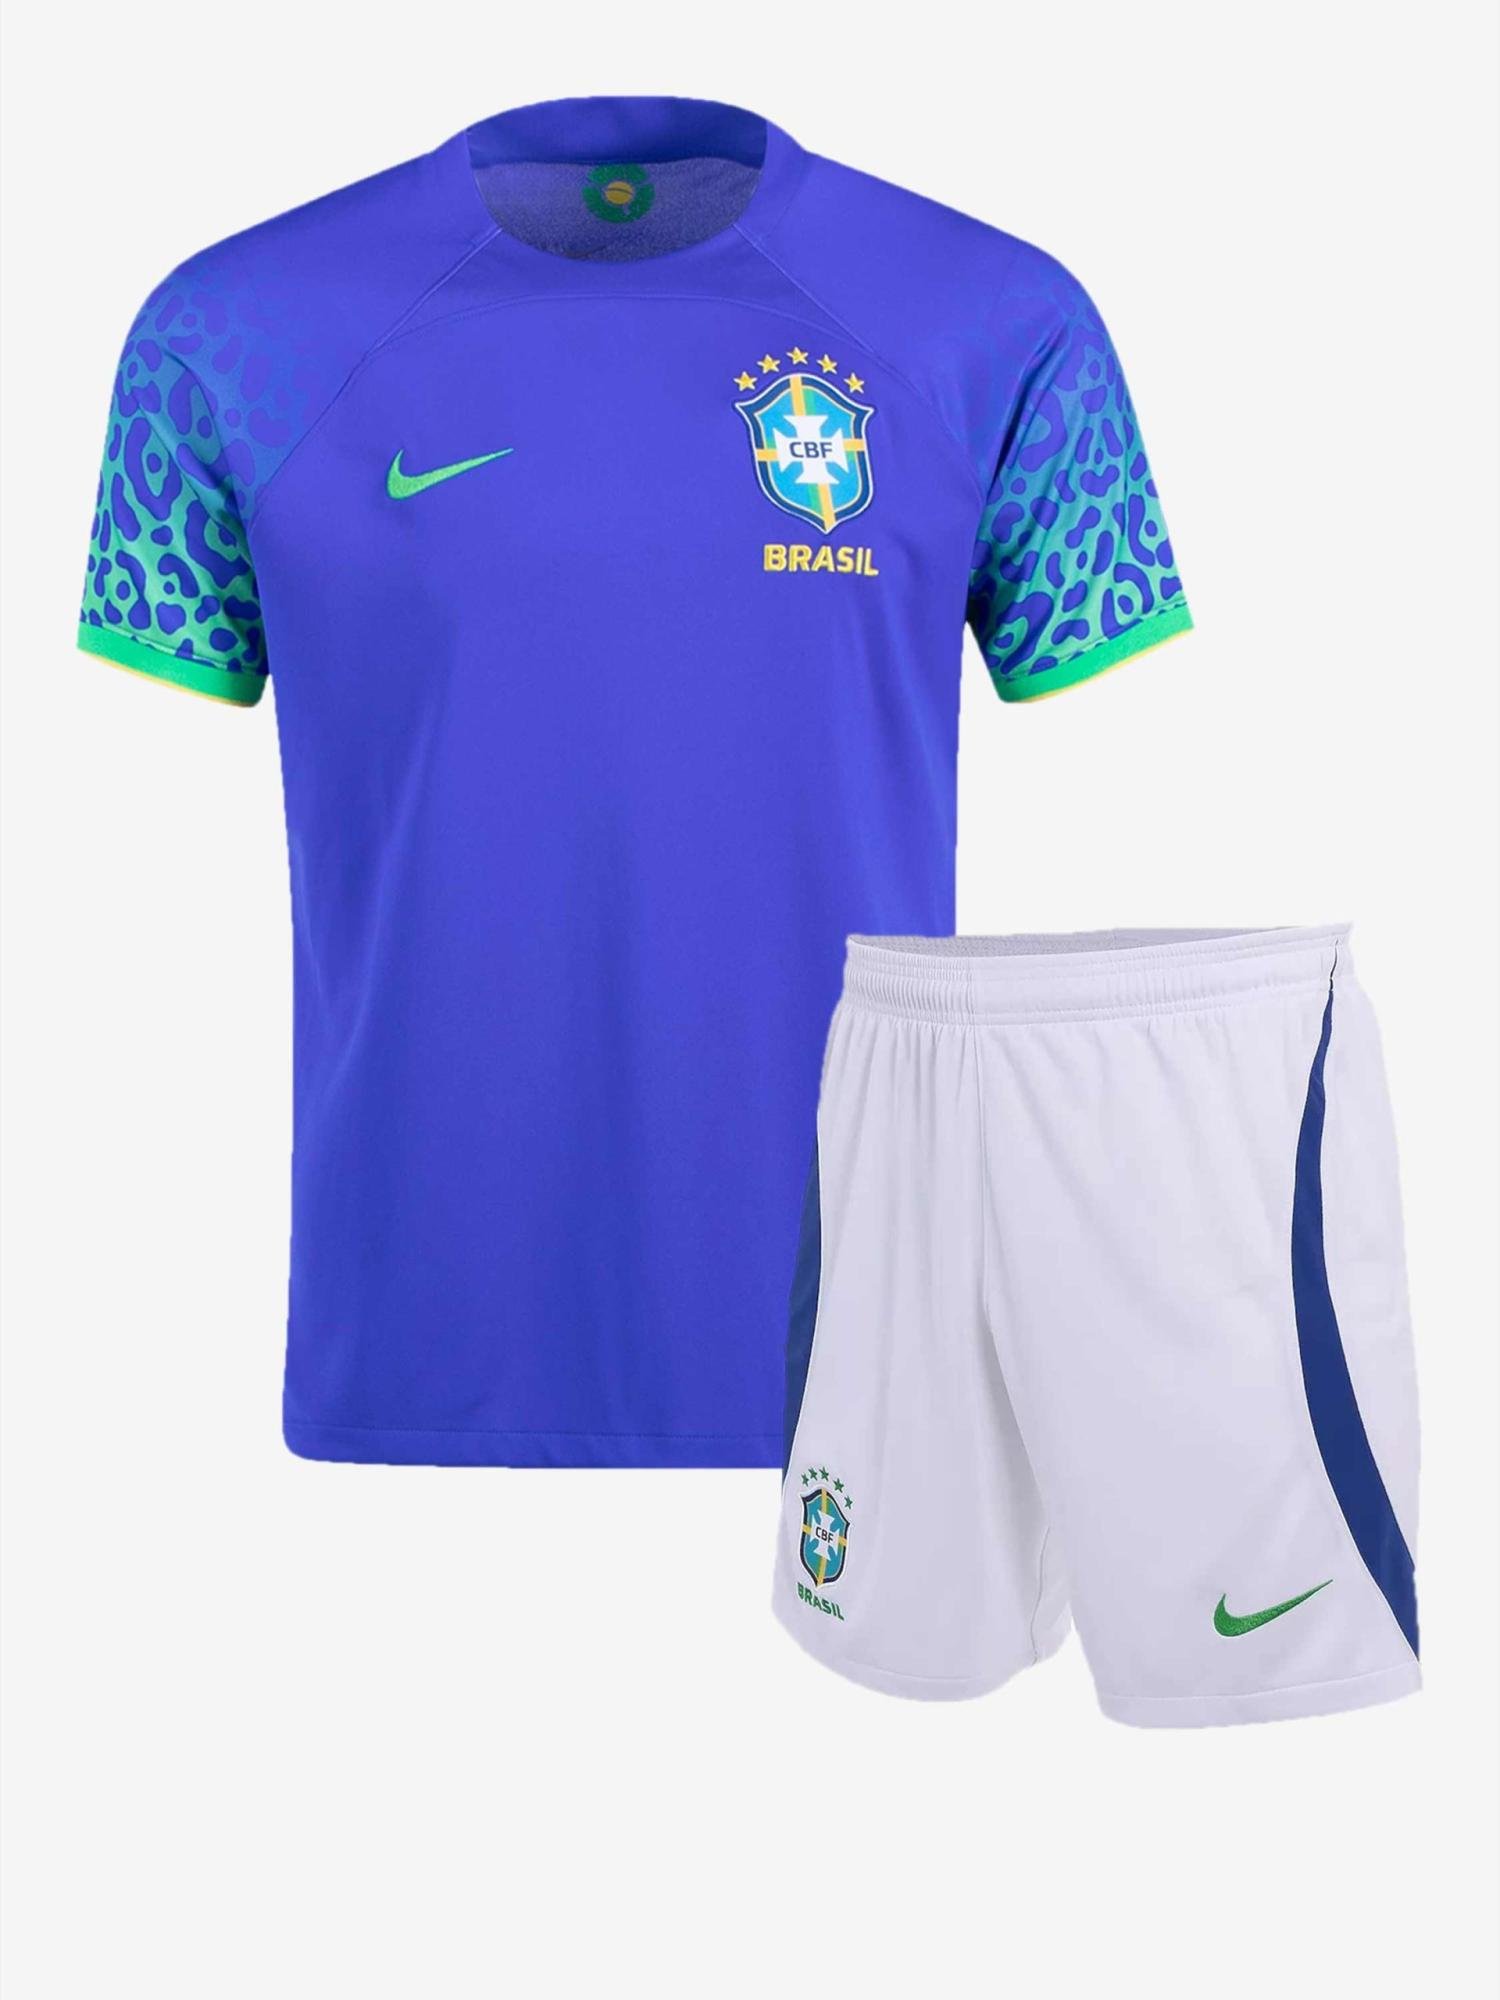 Kitbag Brazil Soccer Jersey with Matching Shorts India